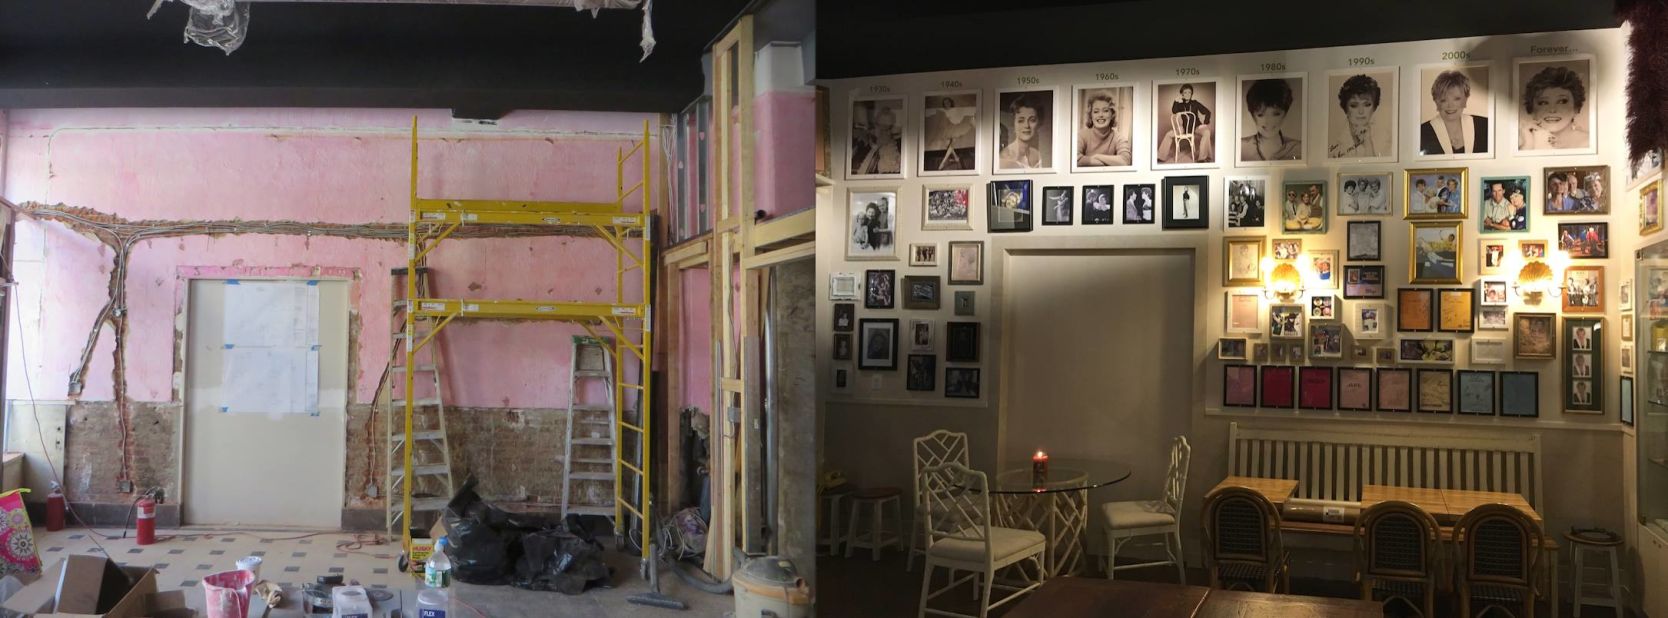 Before and after shots show the evolution of the Rue La Rue Café.